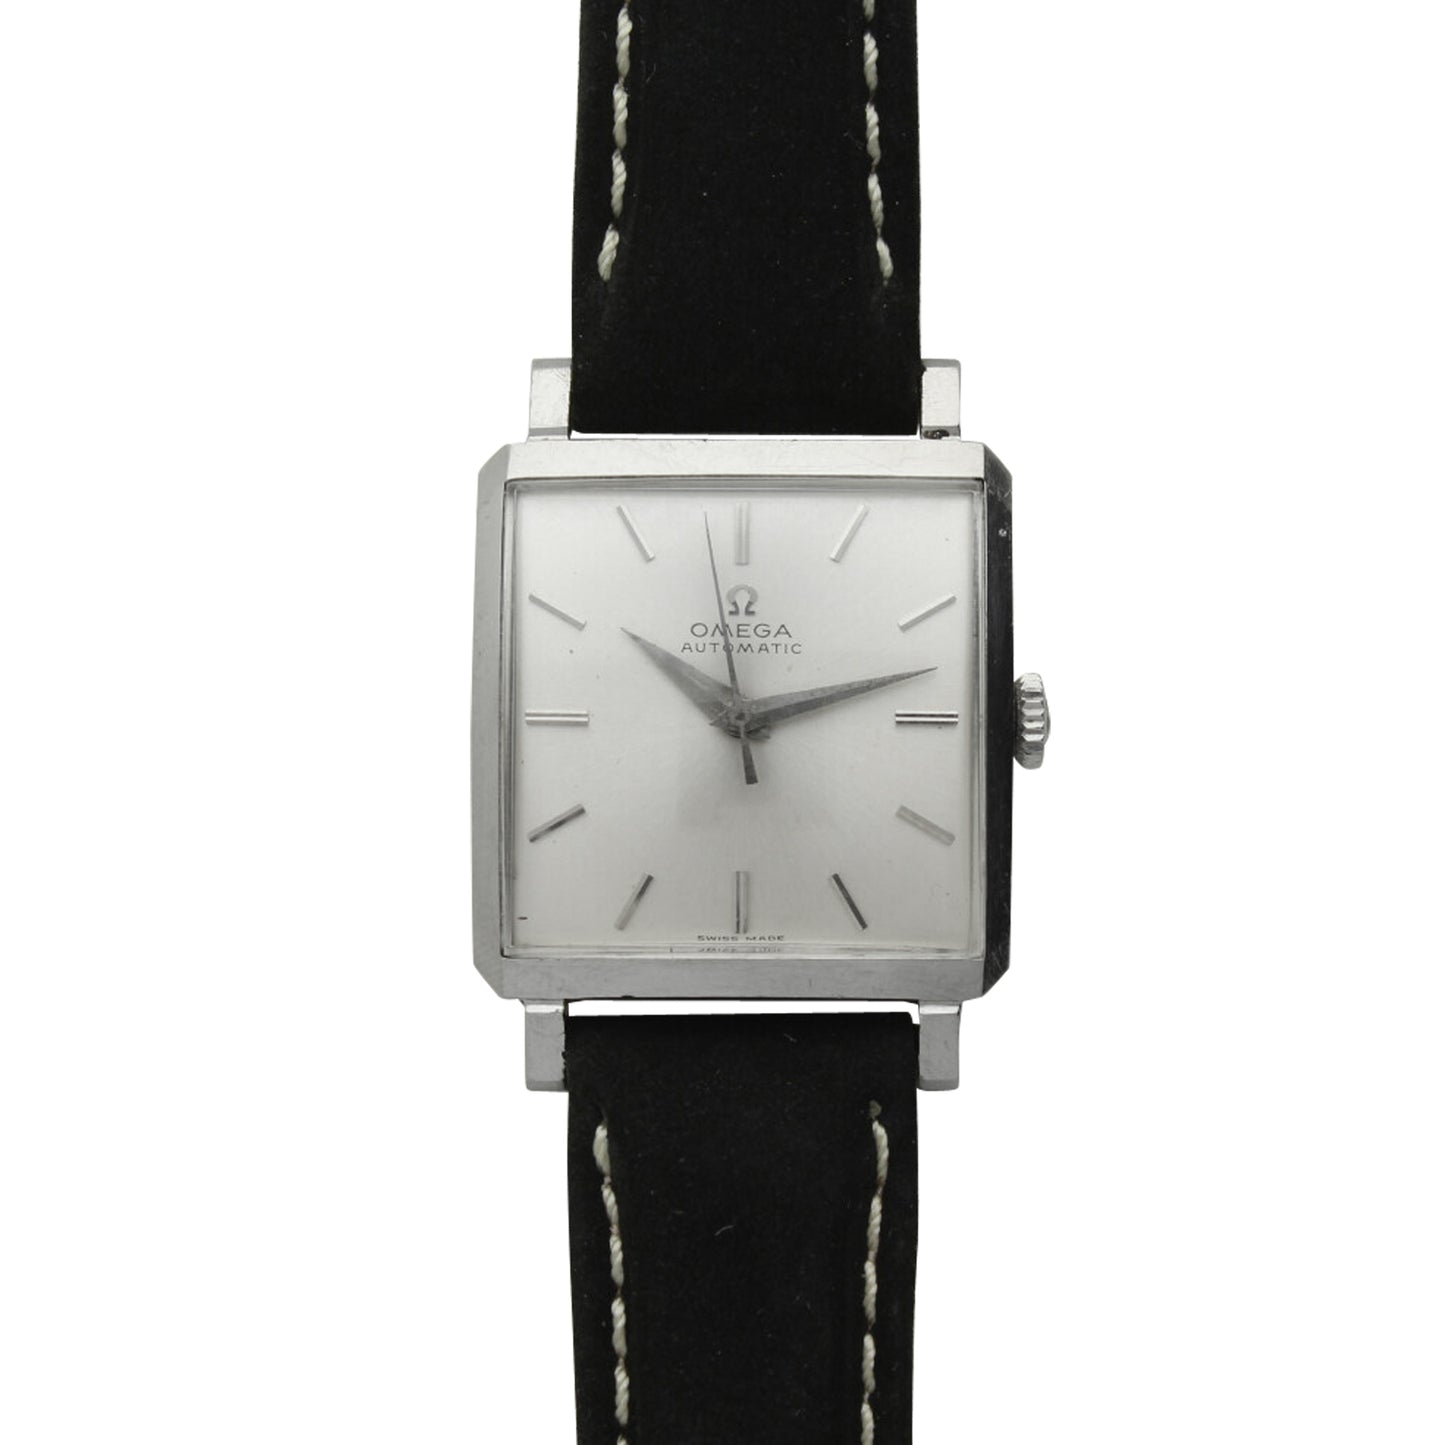 Stainless steel OMEGA Carré automatic wristwatch. Made 1958